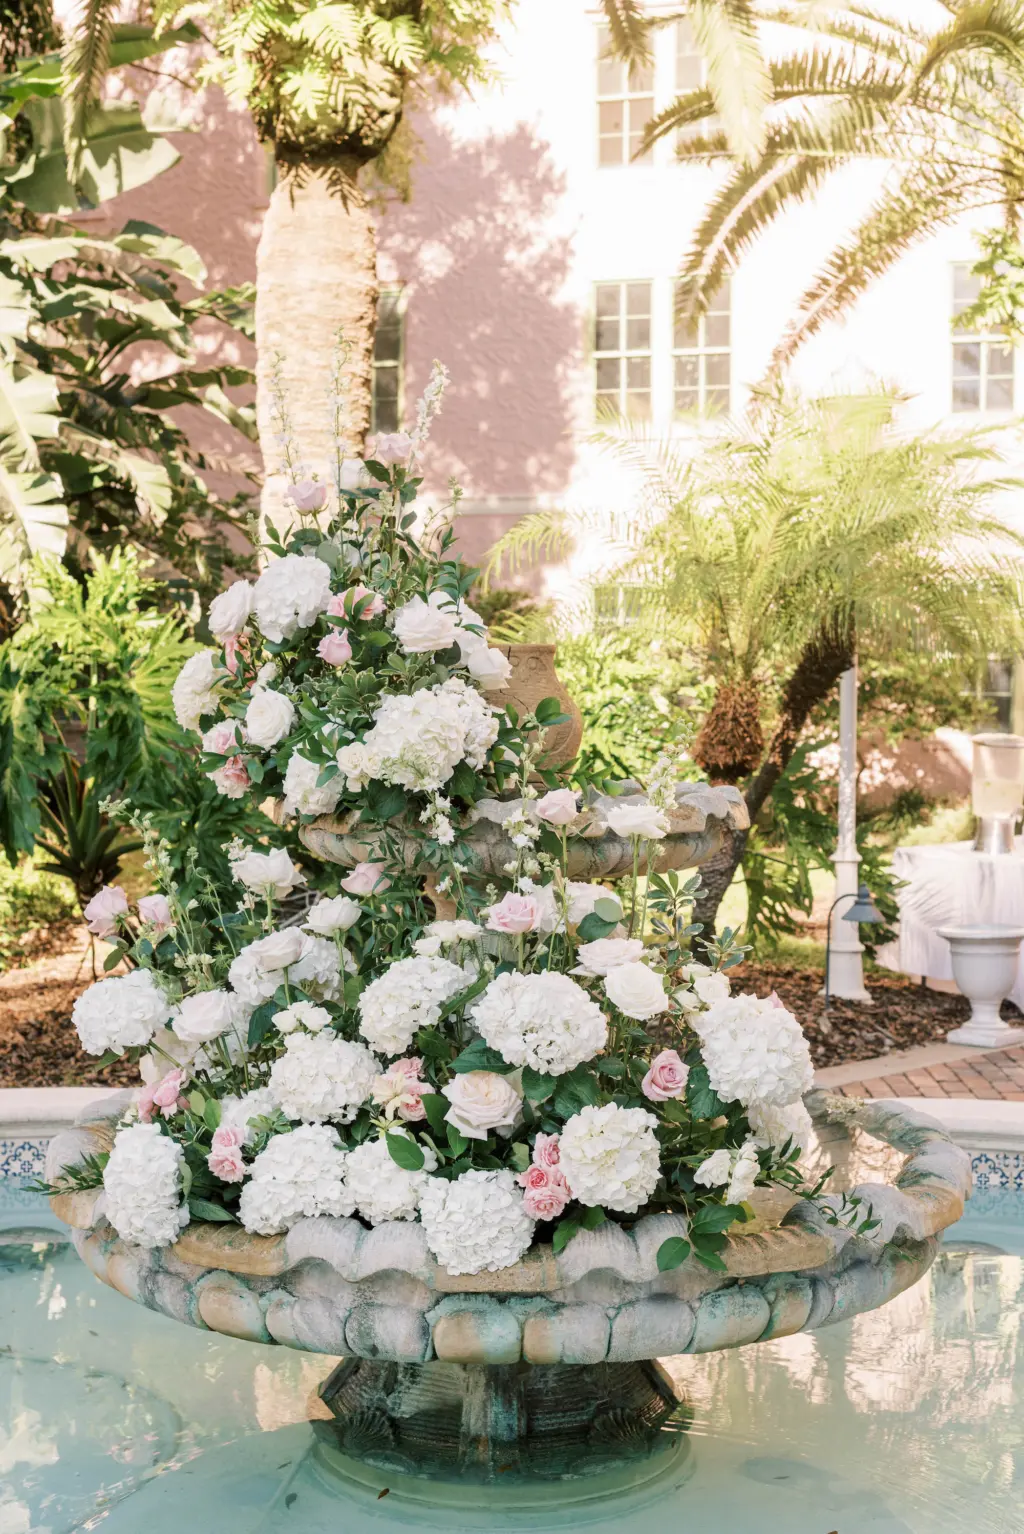 Fountain Flower Arrangement for Wedding Ceremony with White Hydrangeas, Pink Roses, and Greenery | St Pete Florist Bruce Wayne Florals